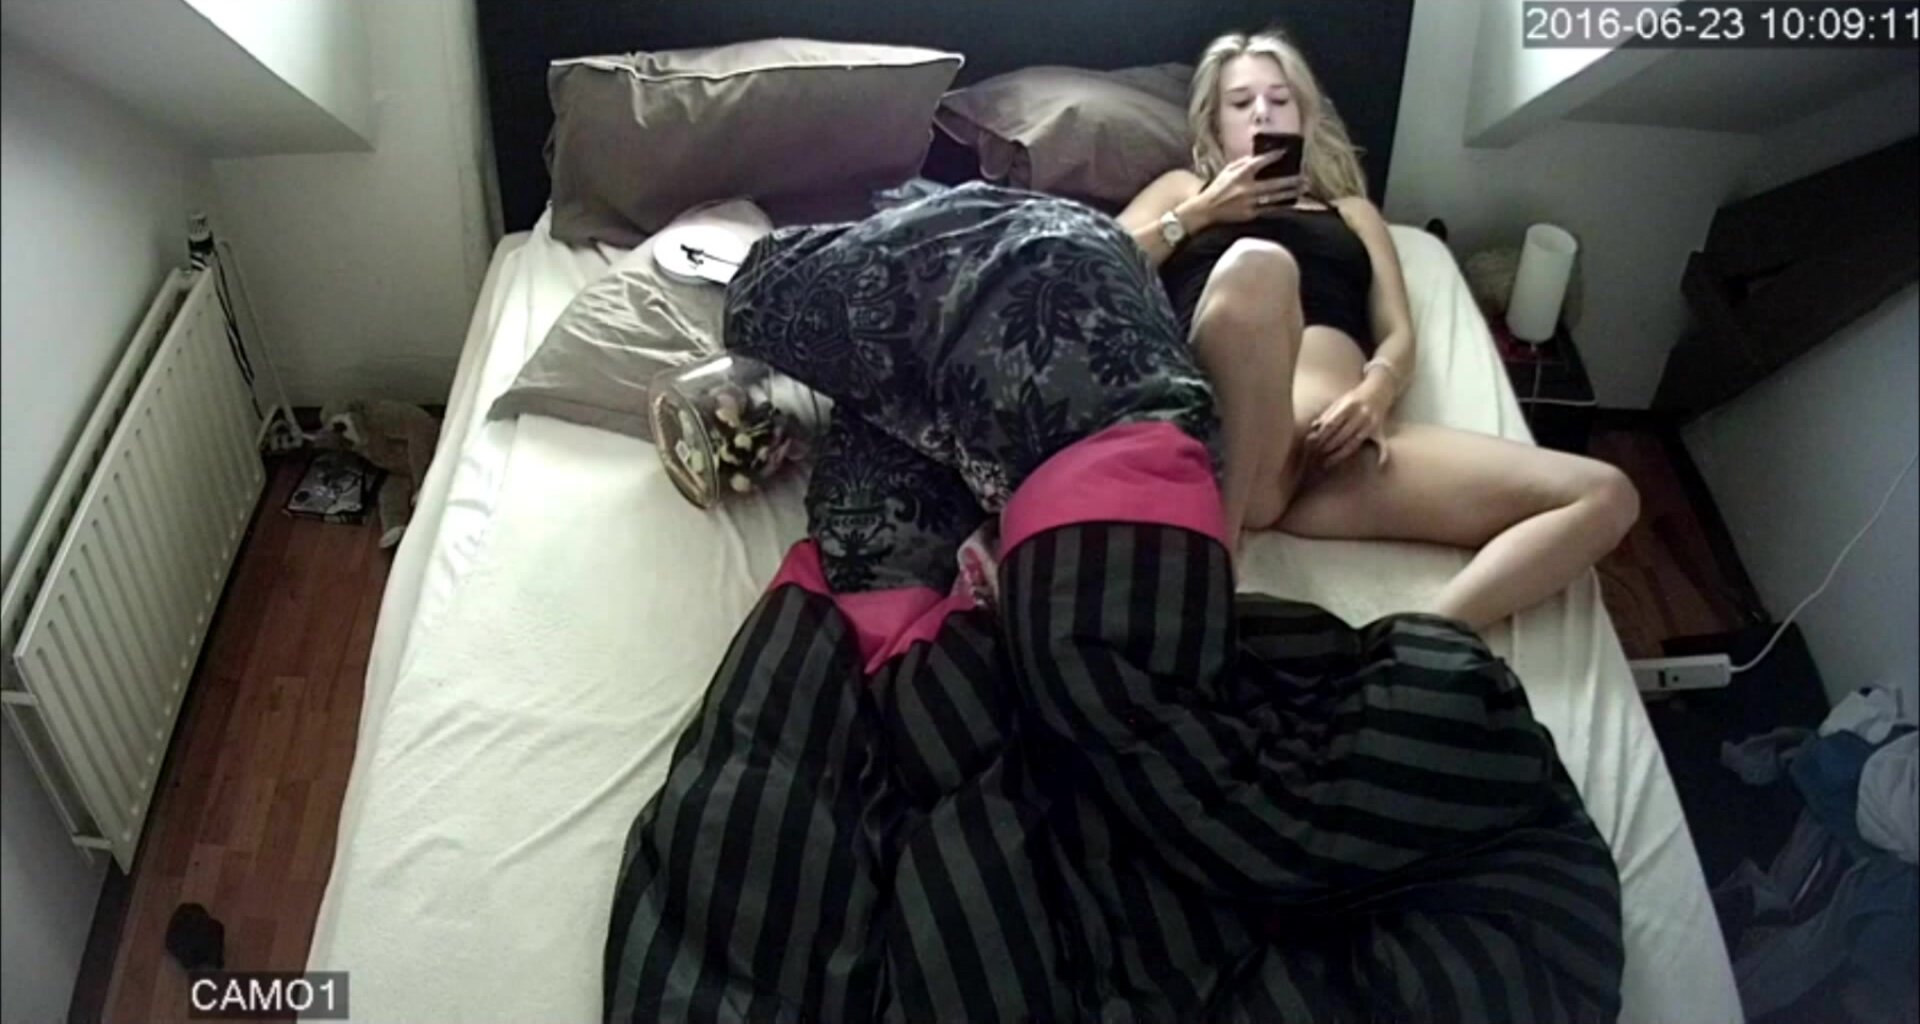 Sex girl caught girl bedroom pic picture